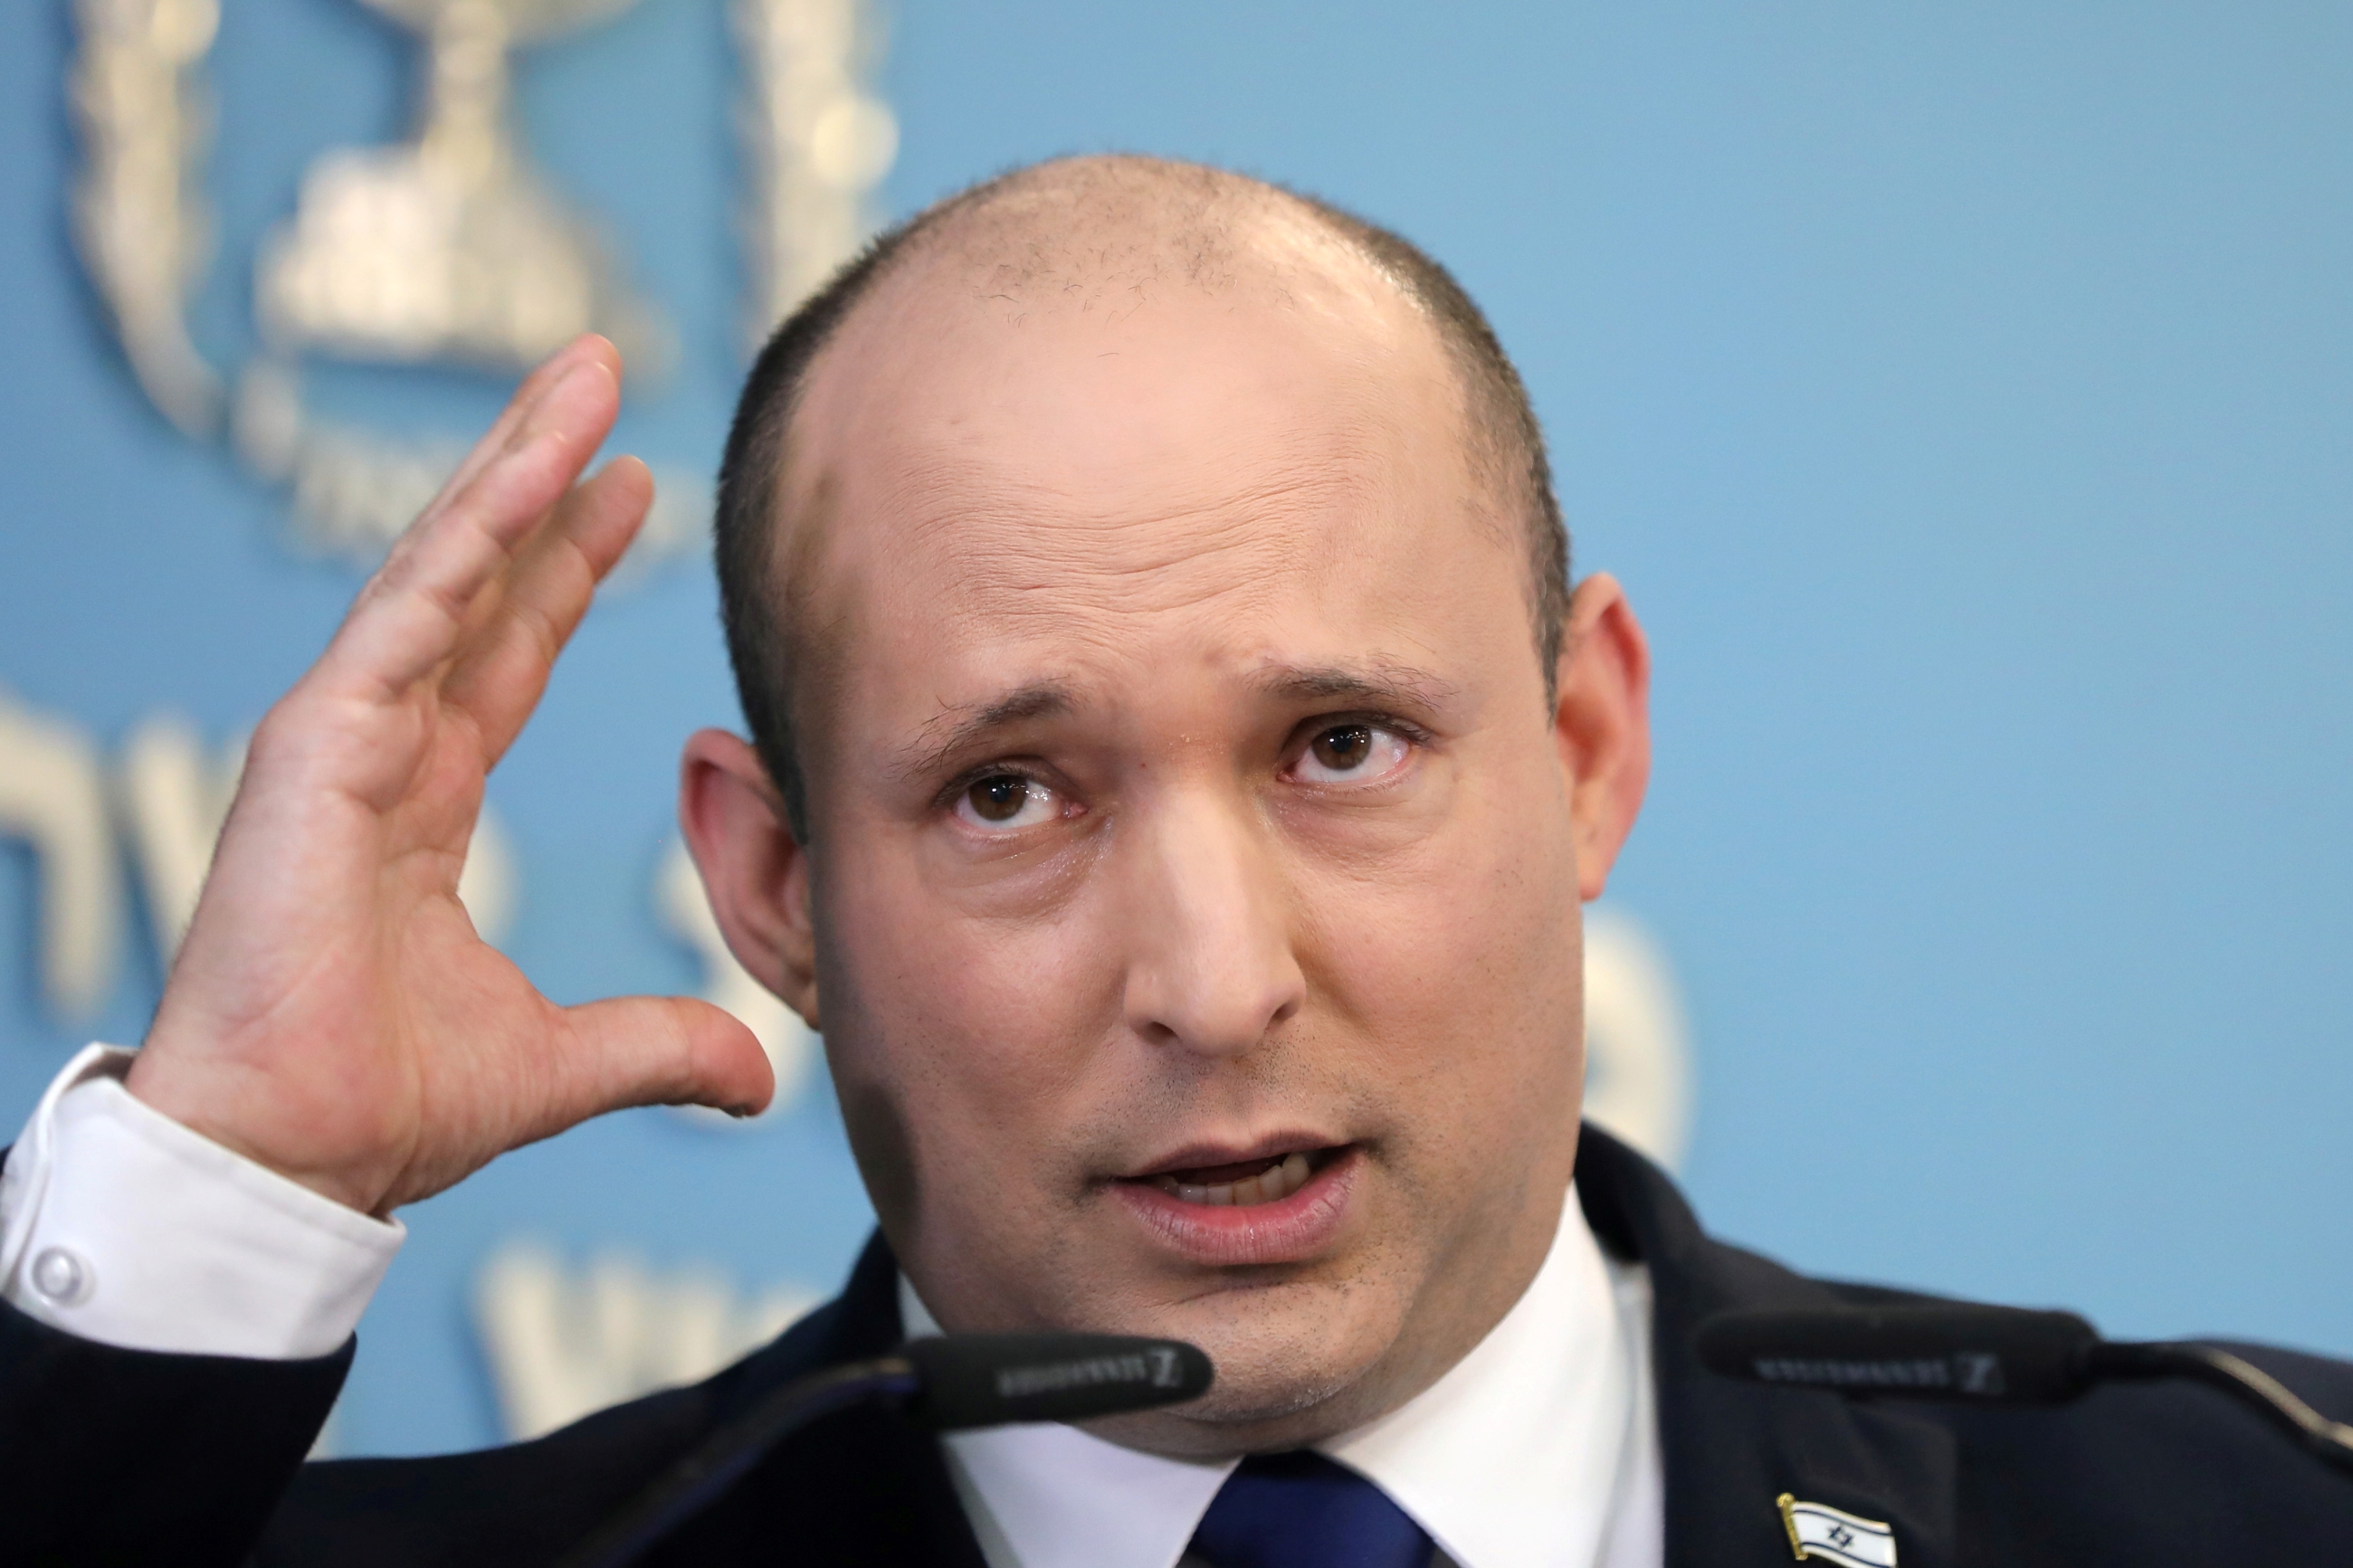 Israeli Prime Minister Naftali Bennett has embarked on a trip to Washington for a visit with US President Joe Biden